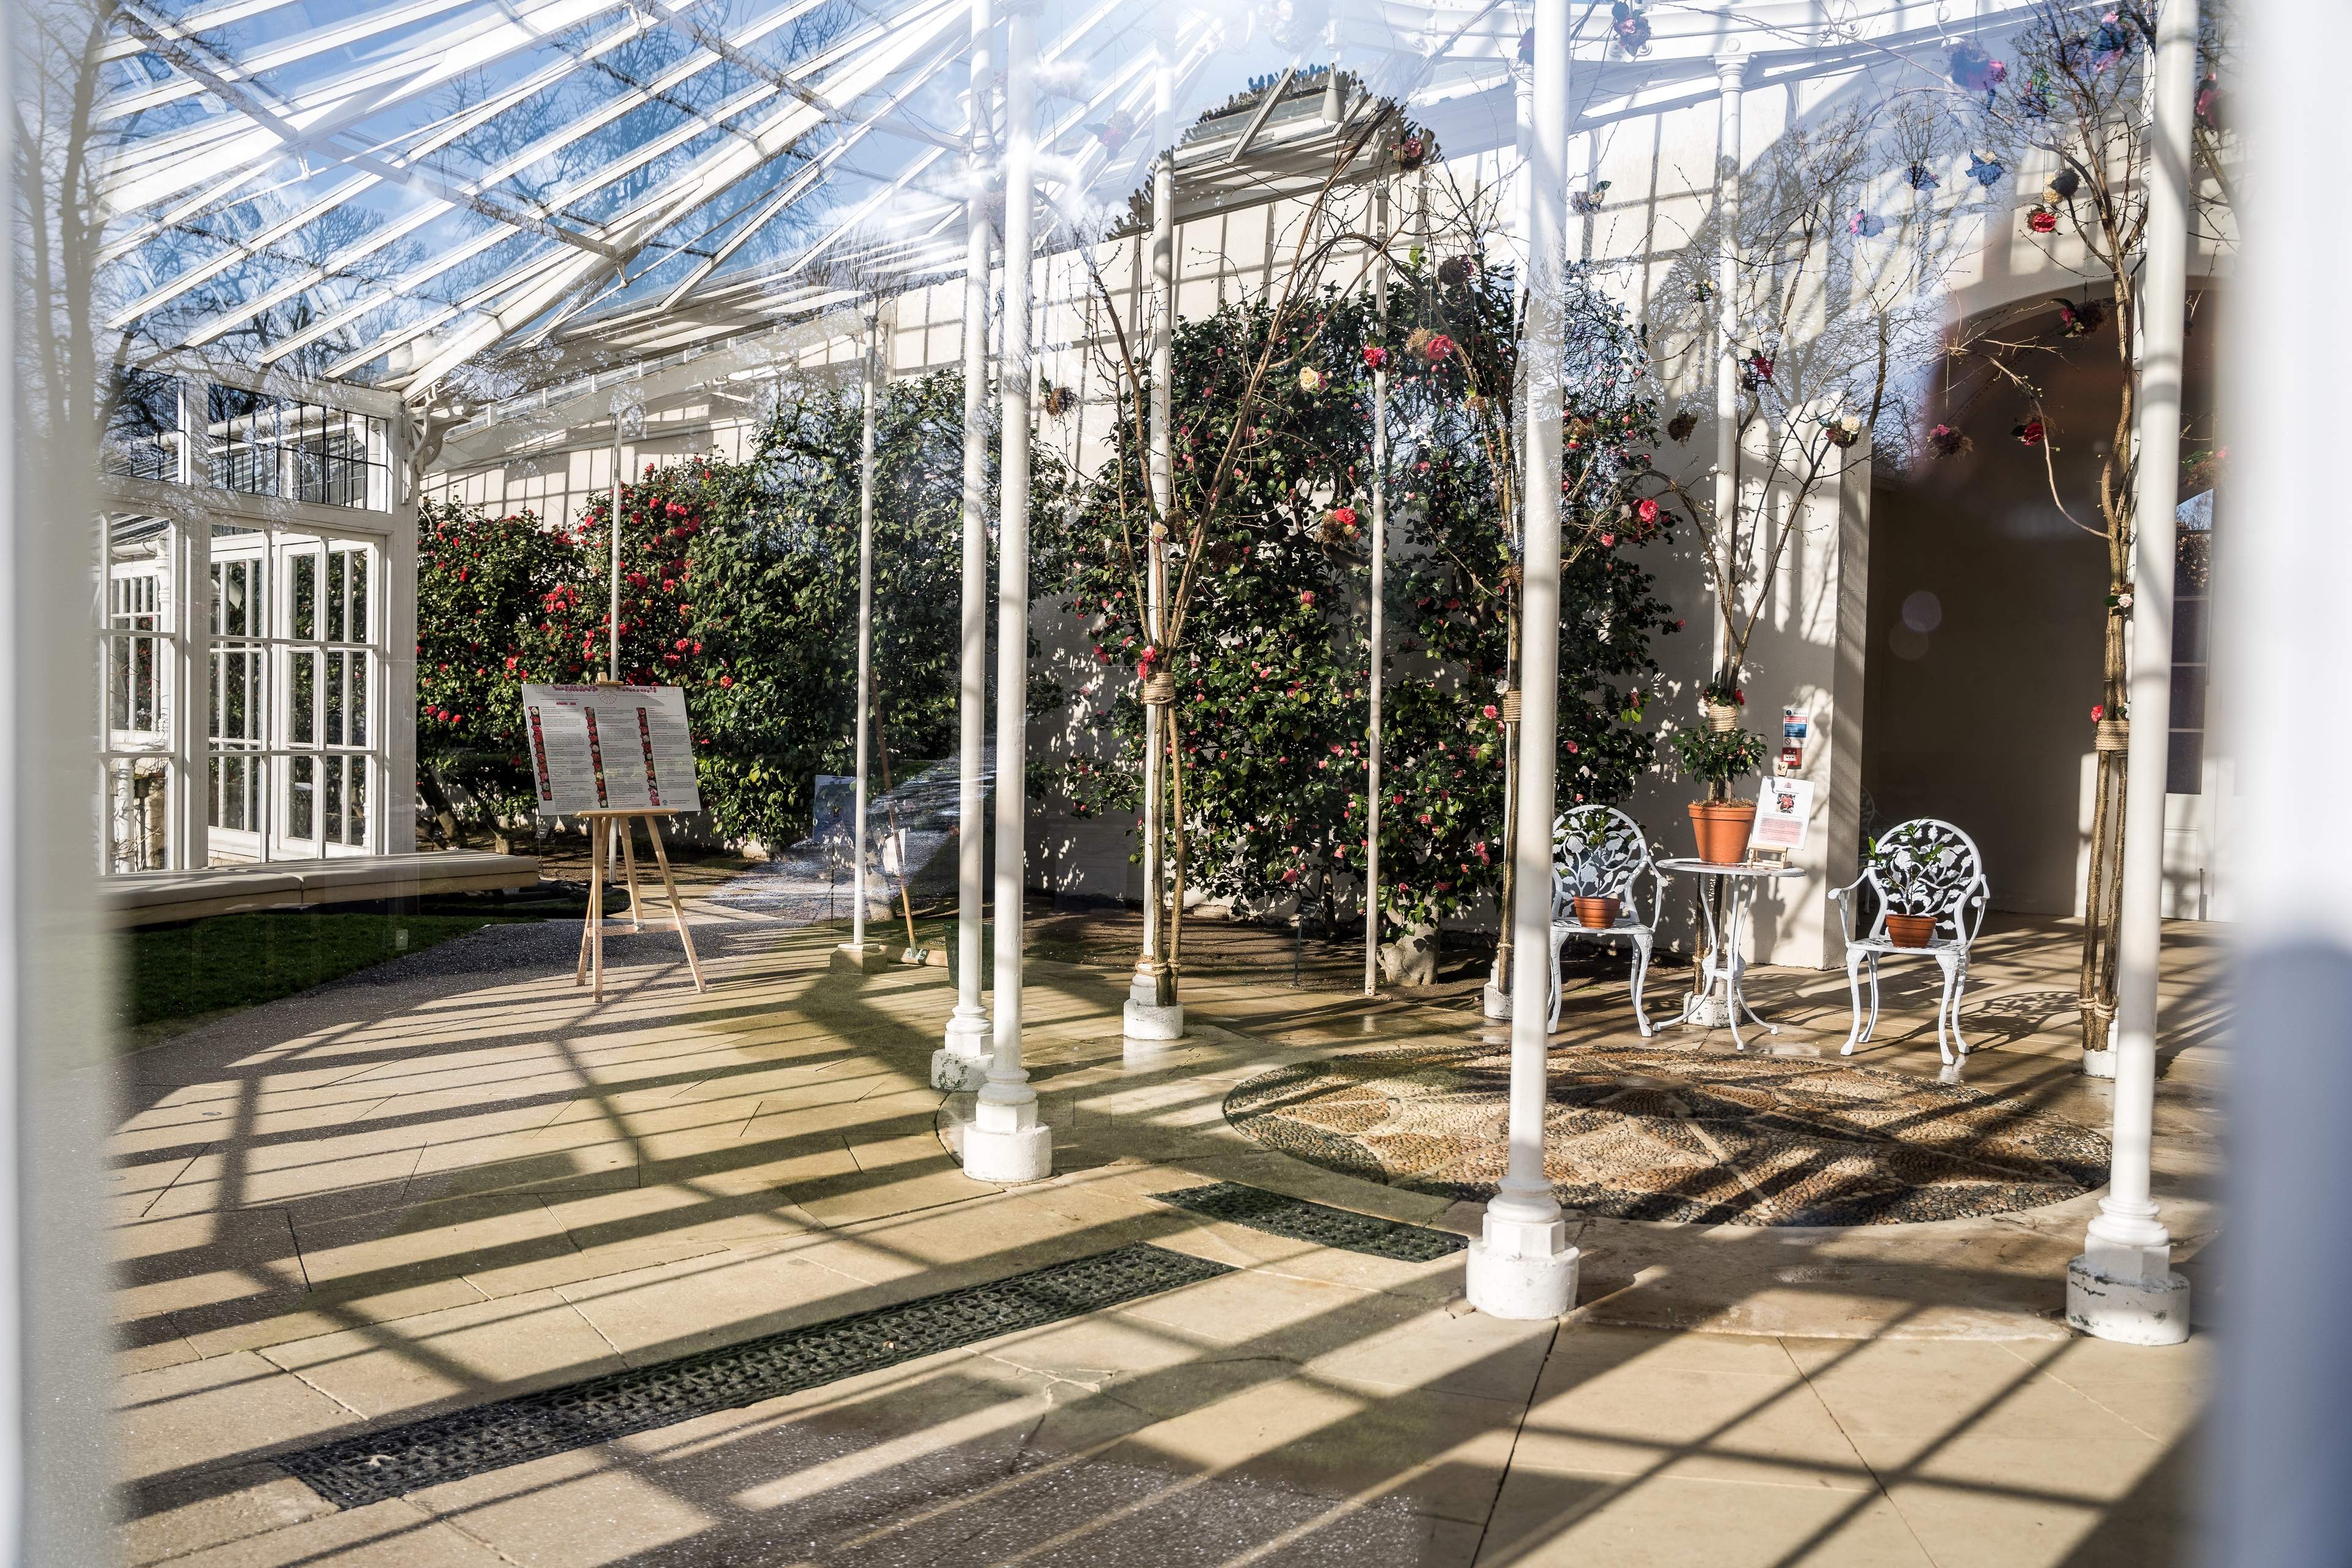 A view into the conservatory featuring Camellia Show, Chiswick Gardens, London, UK